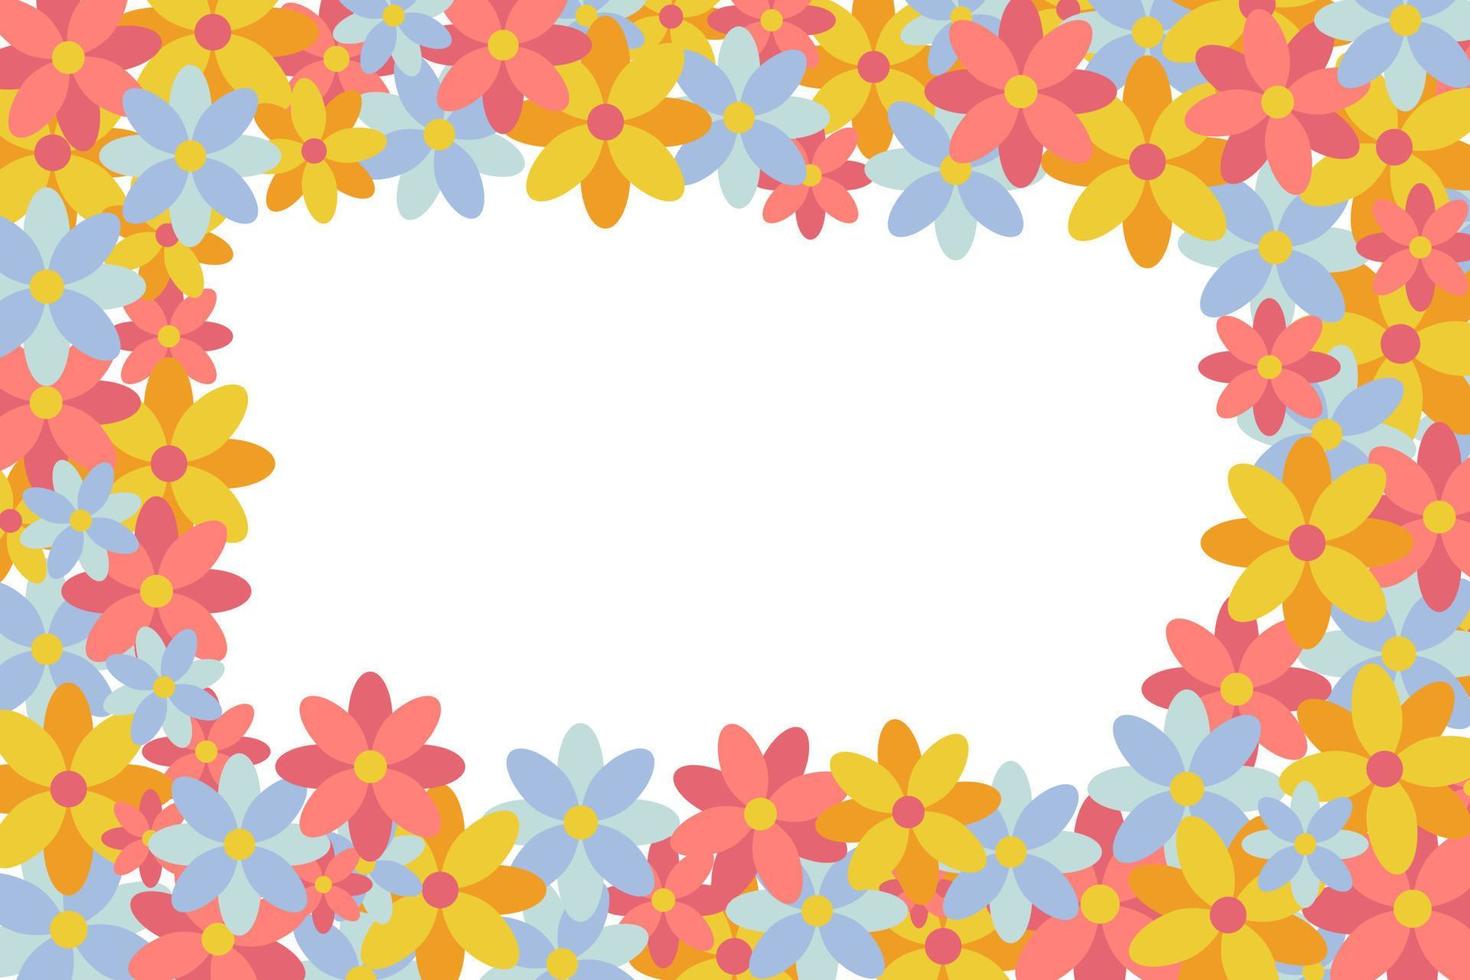 Flower frame made of bright flowers. Multi colored petals. Place for text. Copy space. Rectangular template, horizontal floral border. Vector illustration